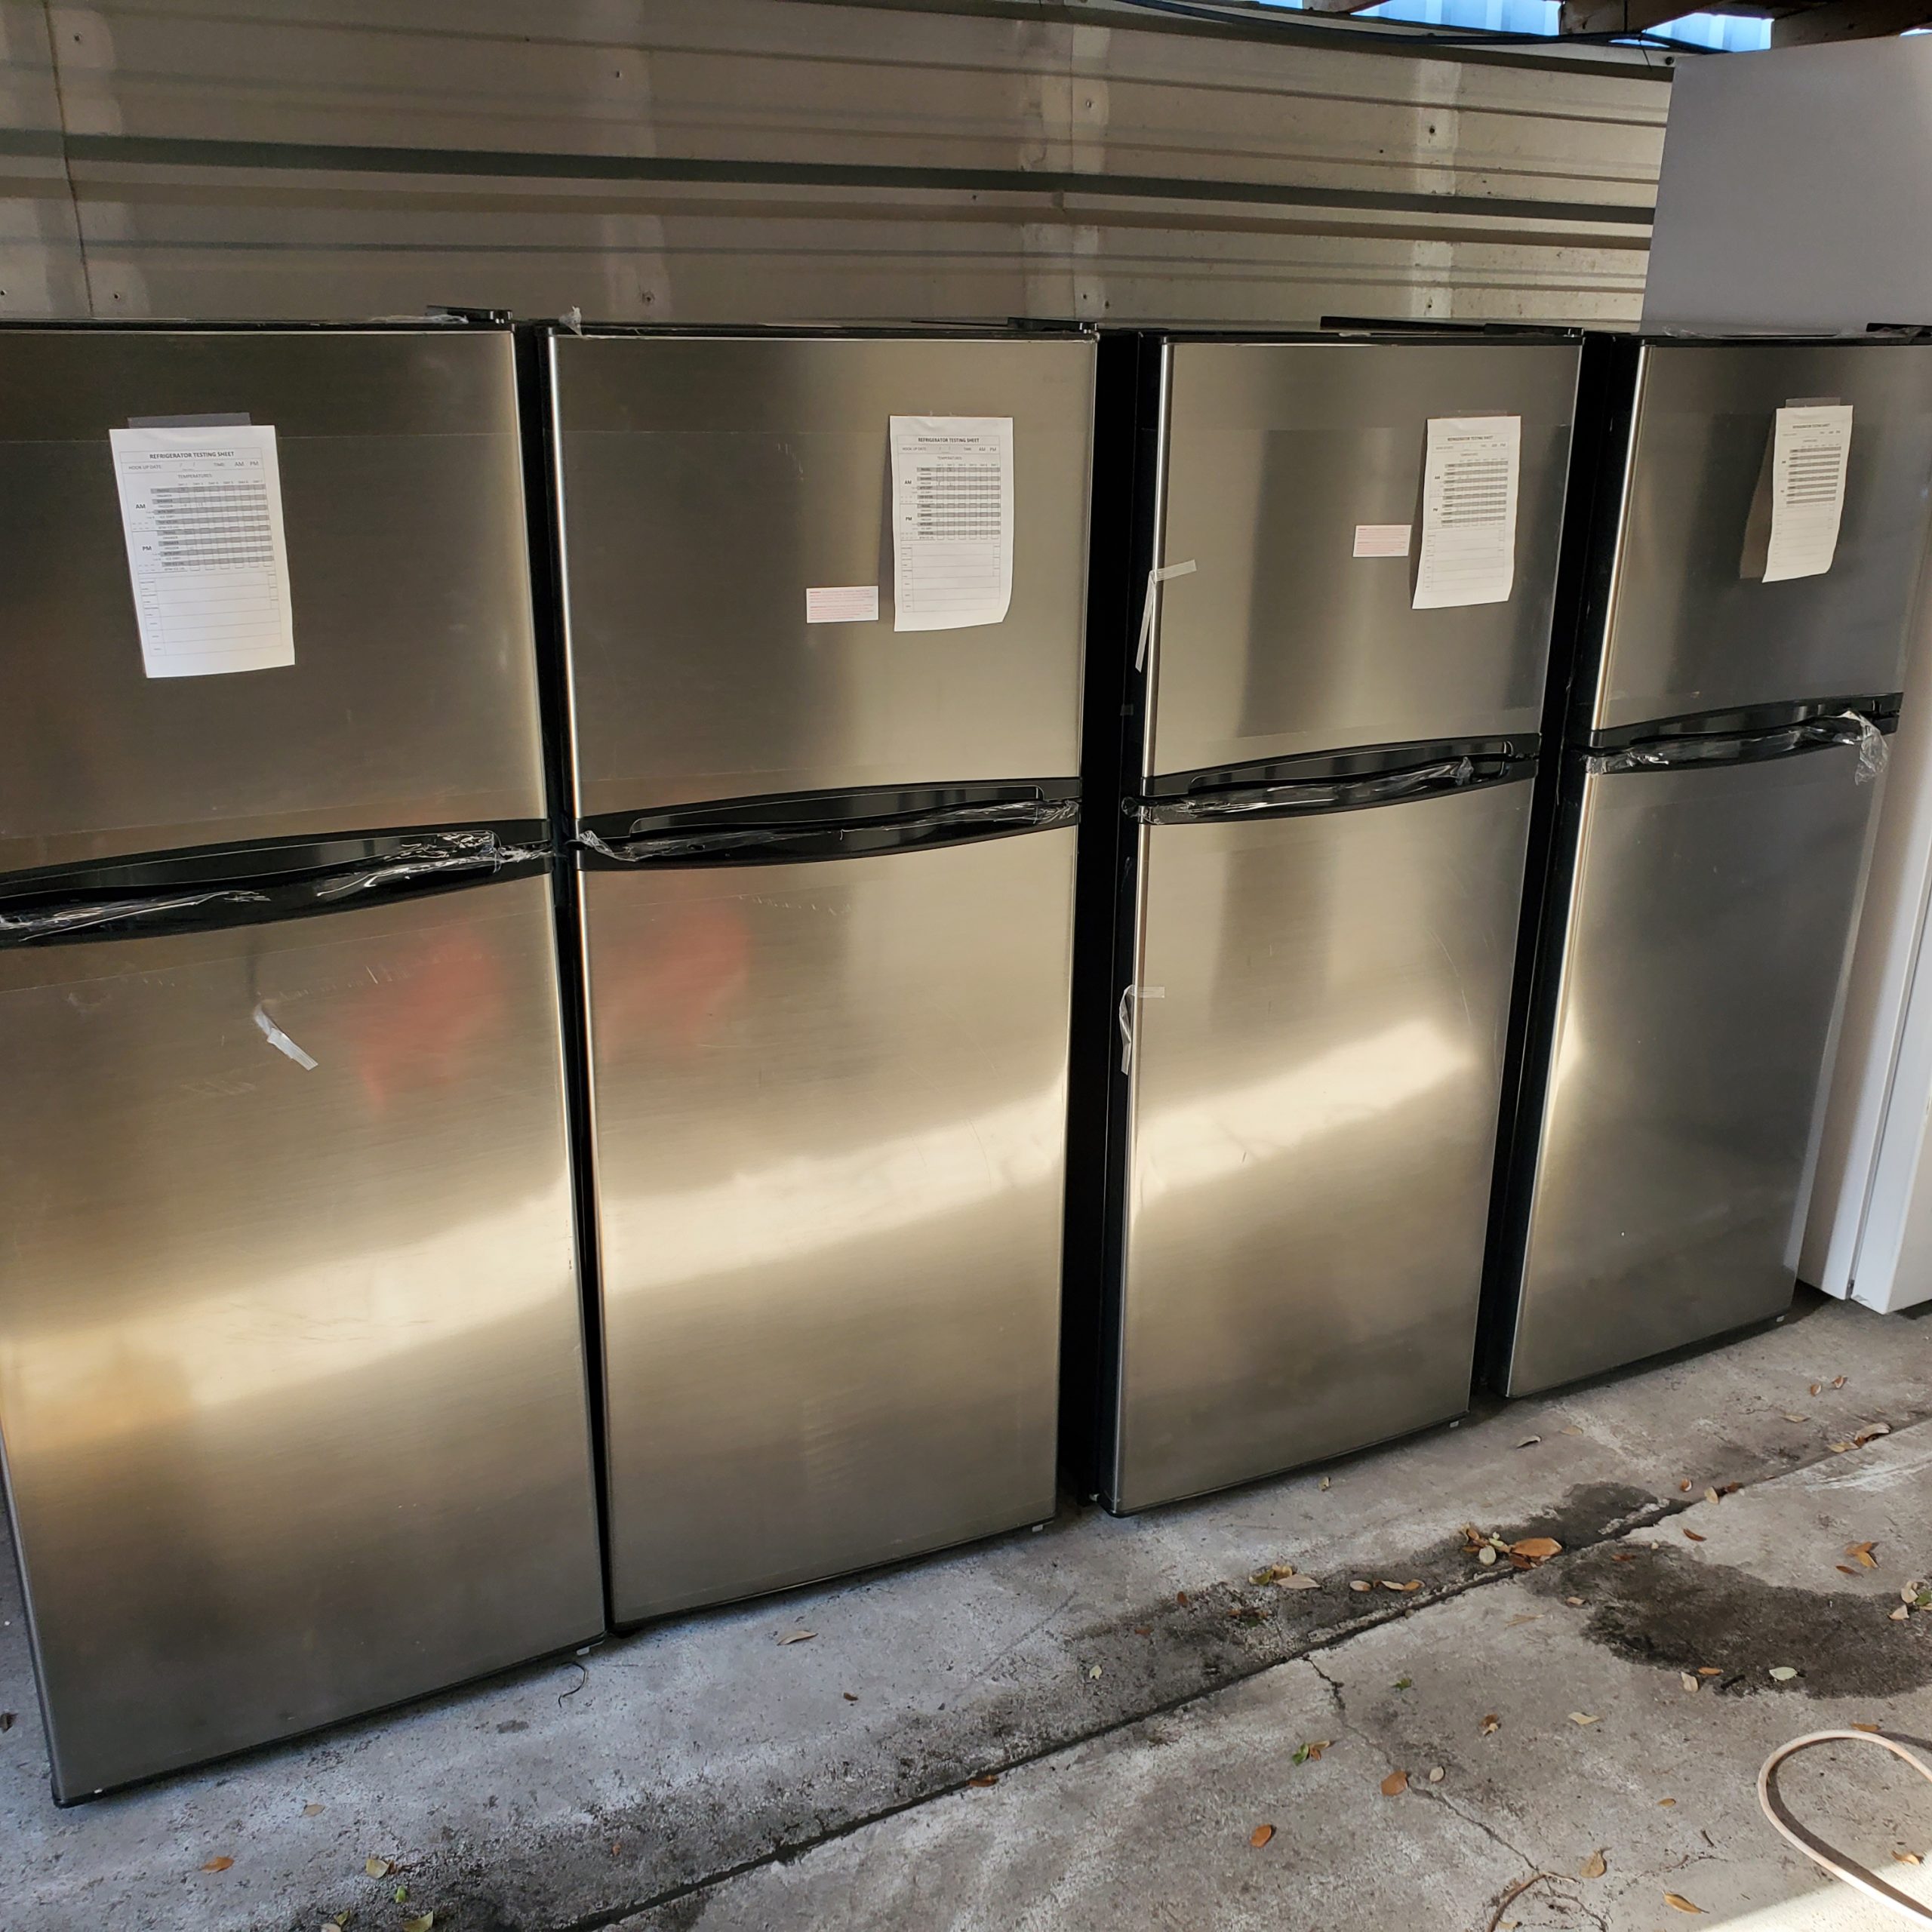 example pictures of Whirlpool stainless steel refrigerators from our wholesale liquidation program.